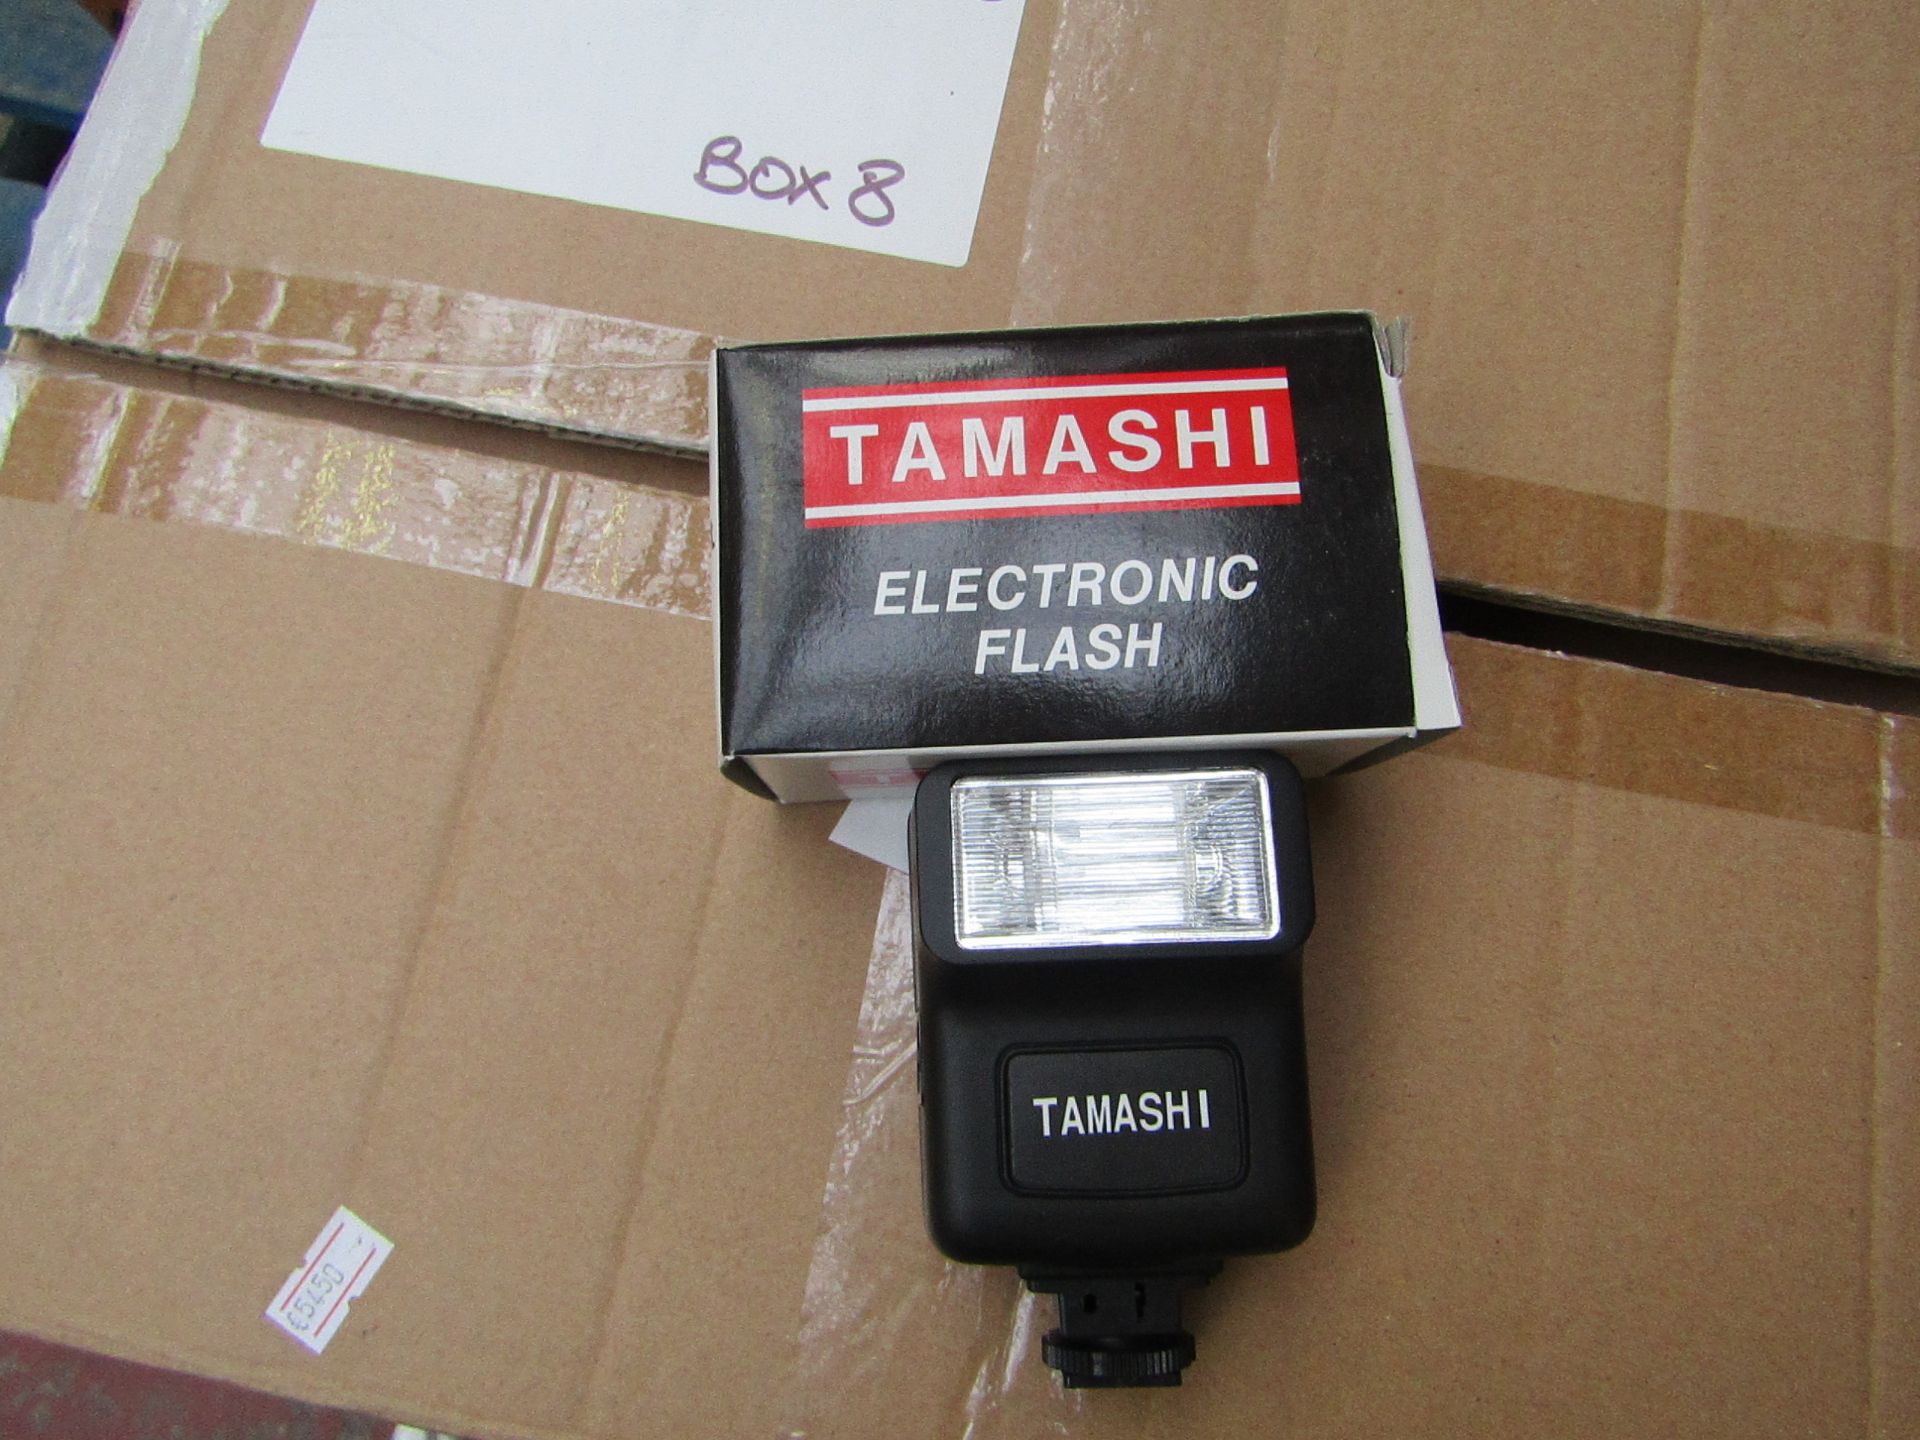 10x Tamashi electronic battery powered flash, all new and boxed.